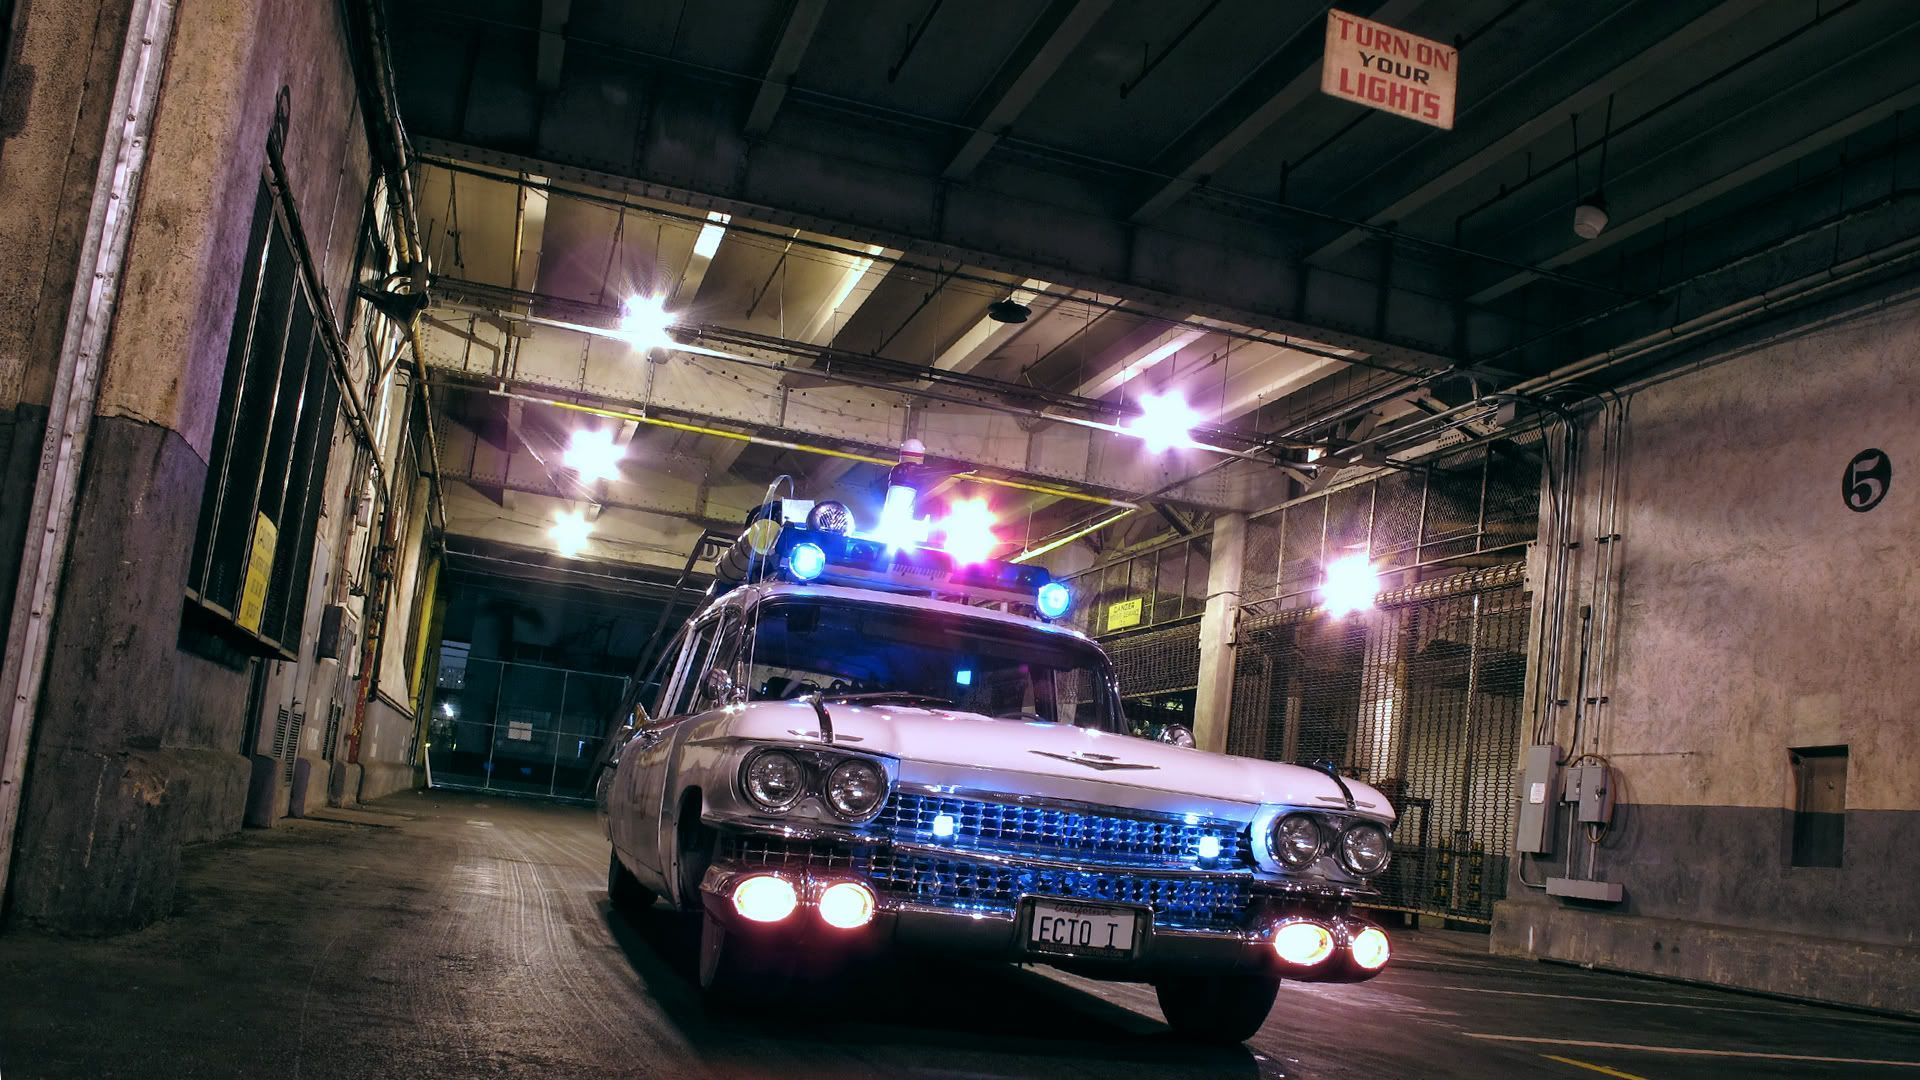 Ghostbuster Mobile Ecto 1 [1920x1080]. Ghostbusters, Ghostbusters